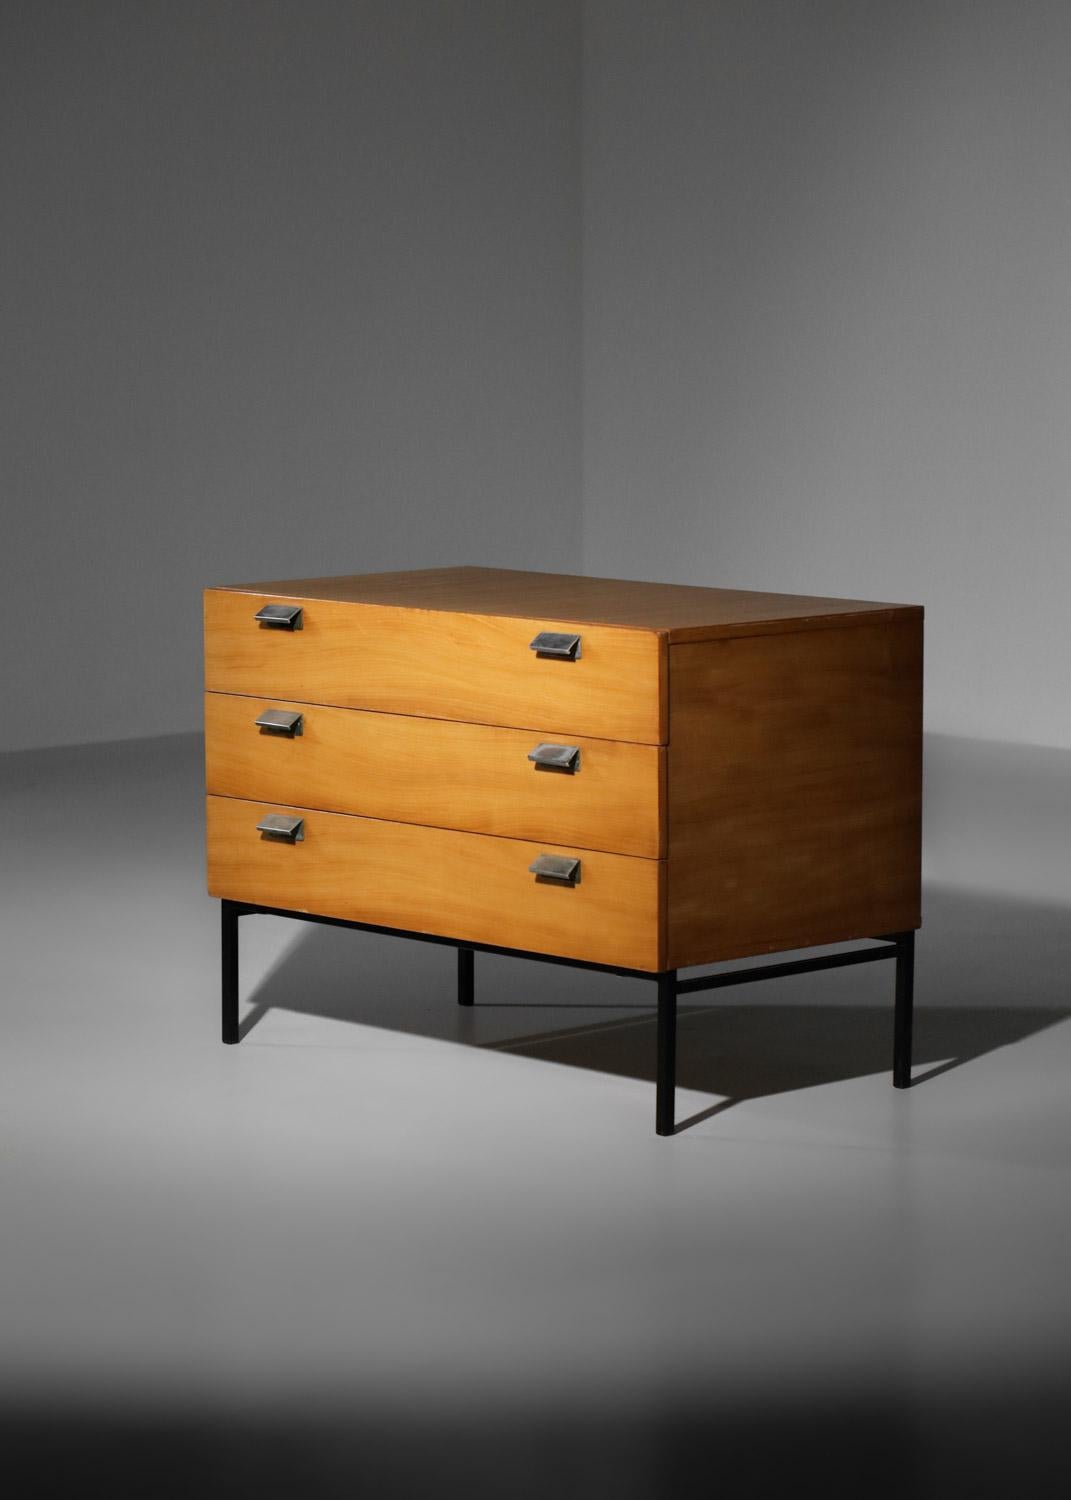 Rare chest of drawers from the 1960s by the French designer André Monpoix edited at the same time by Meuble TV. Chest of drawers structure in light wood, black lacquered metal legs and chrome steel 